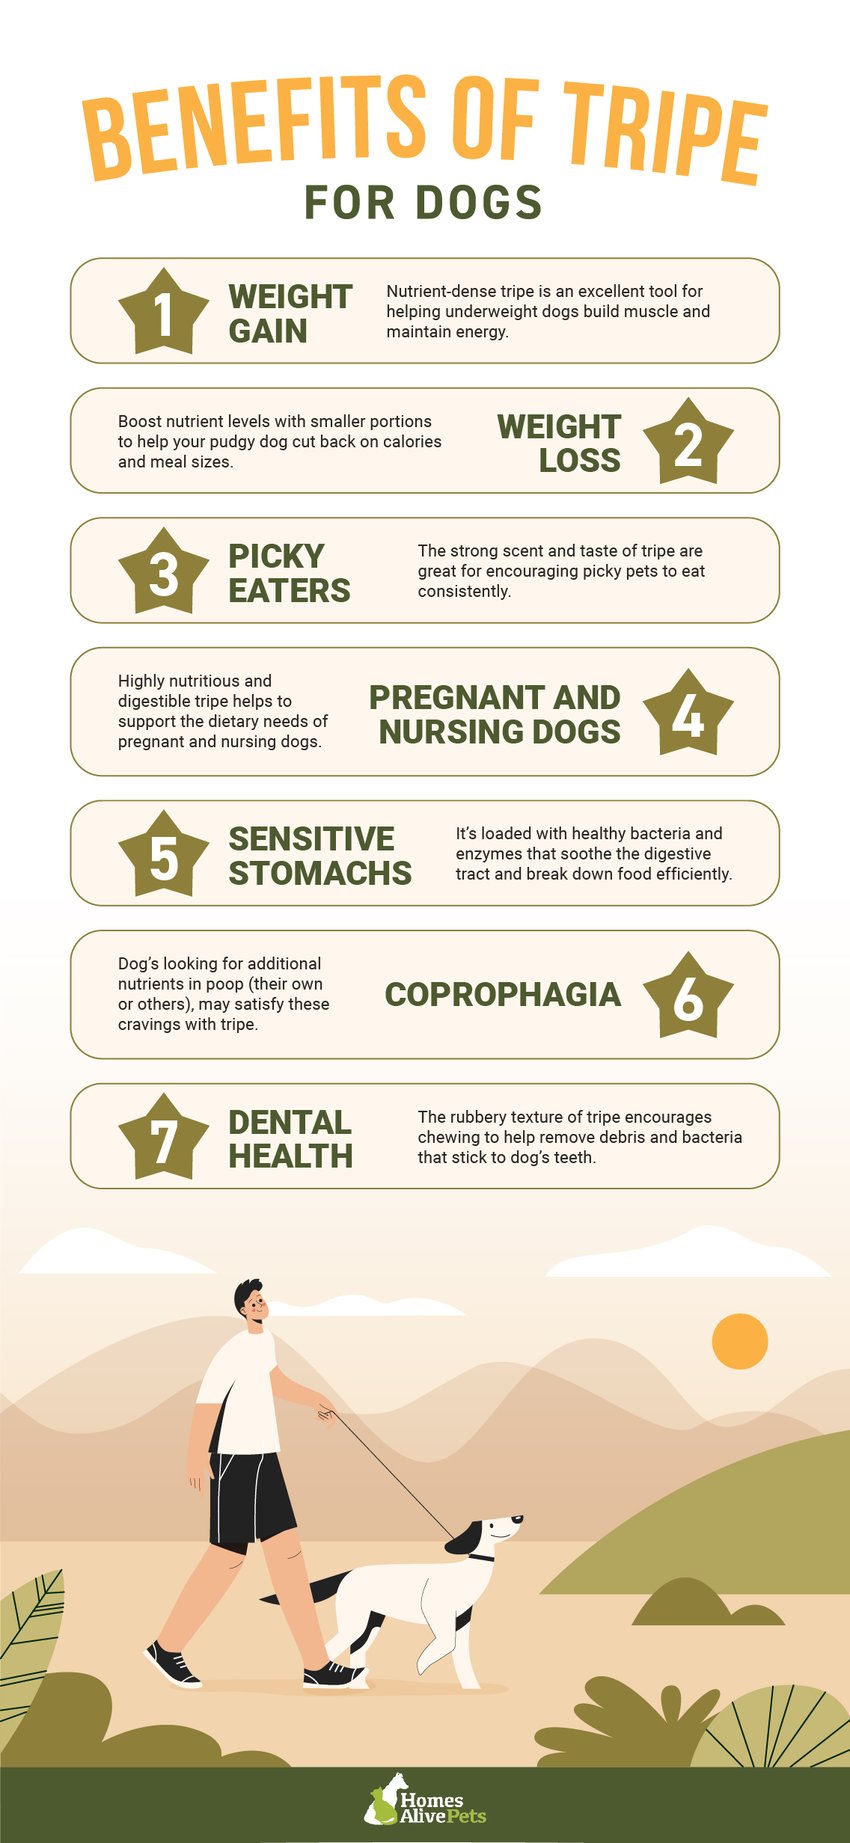 Benefits of Tripe for Dogs